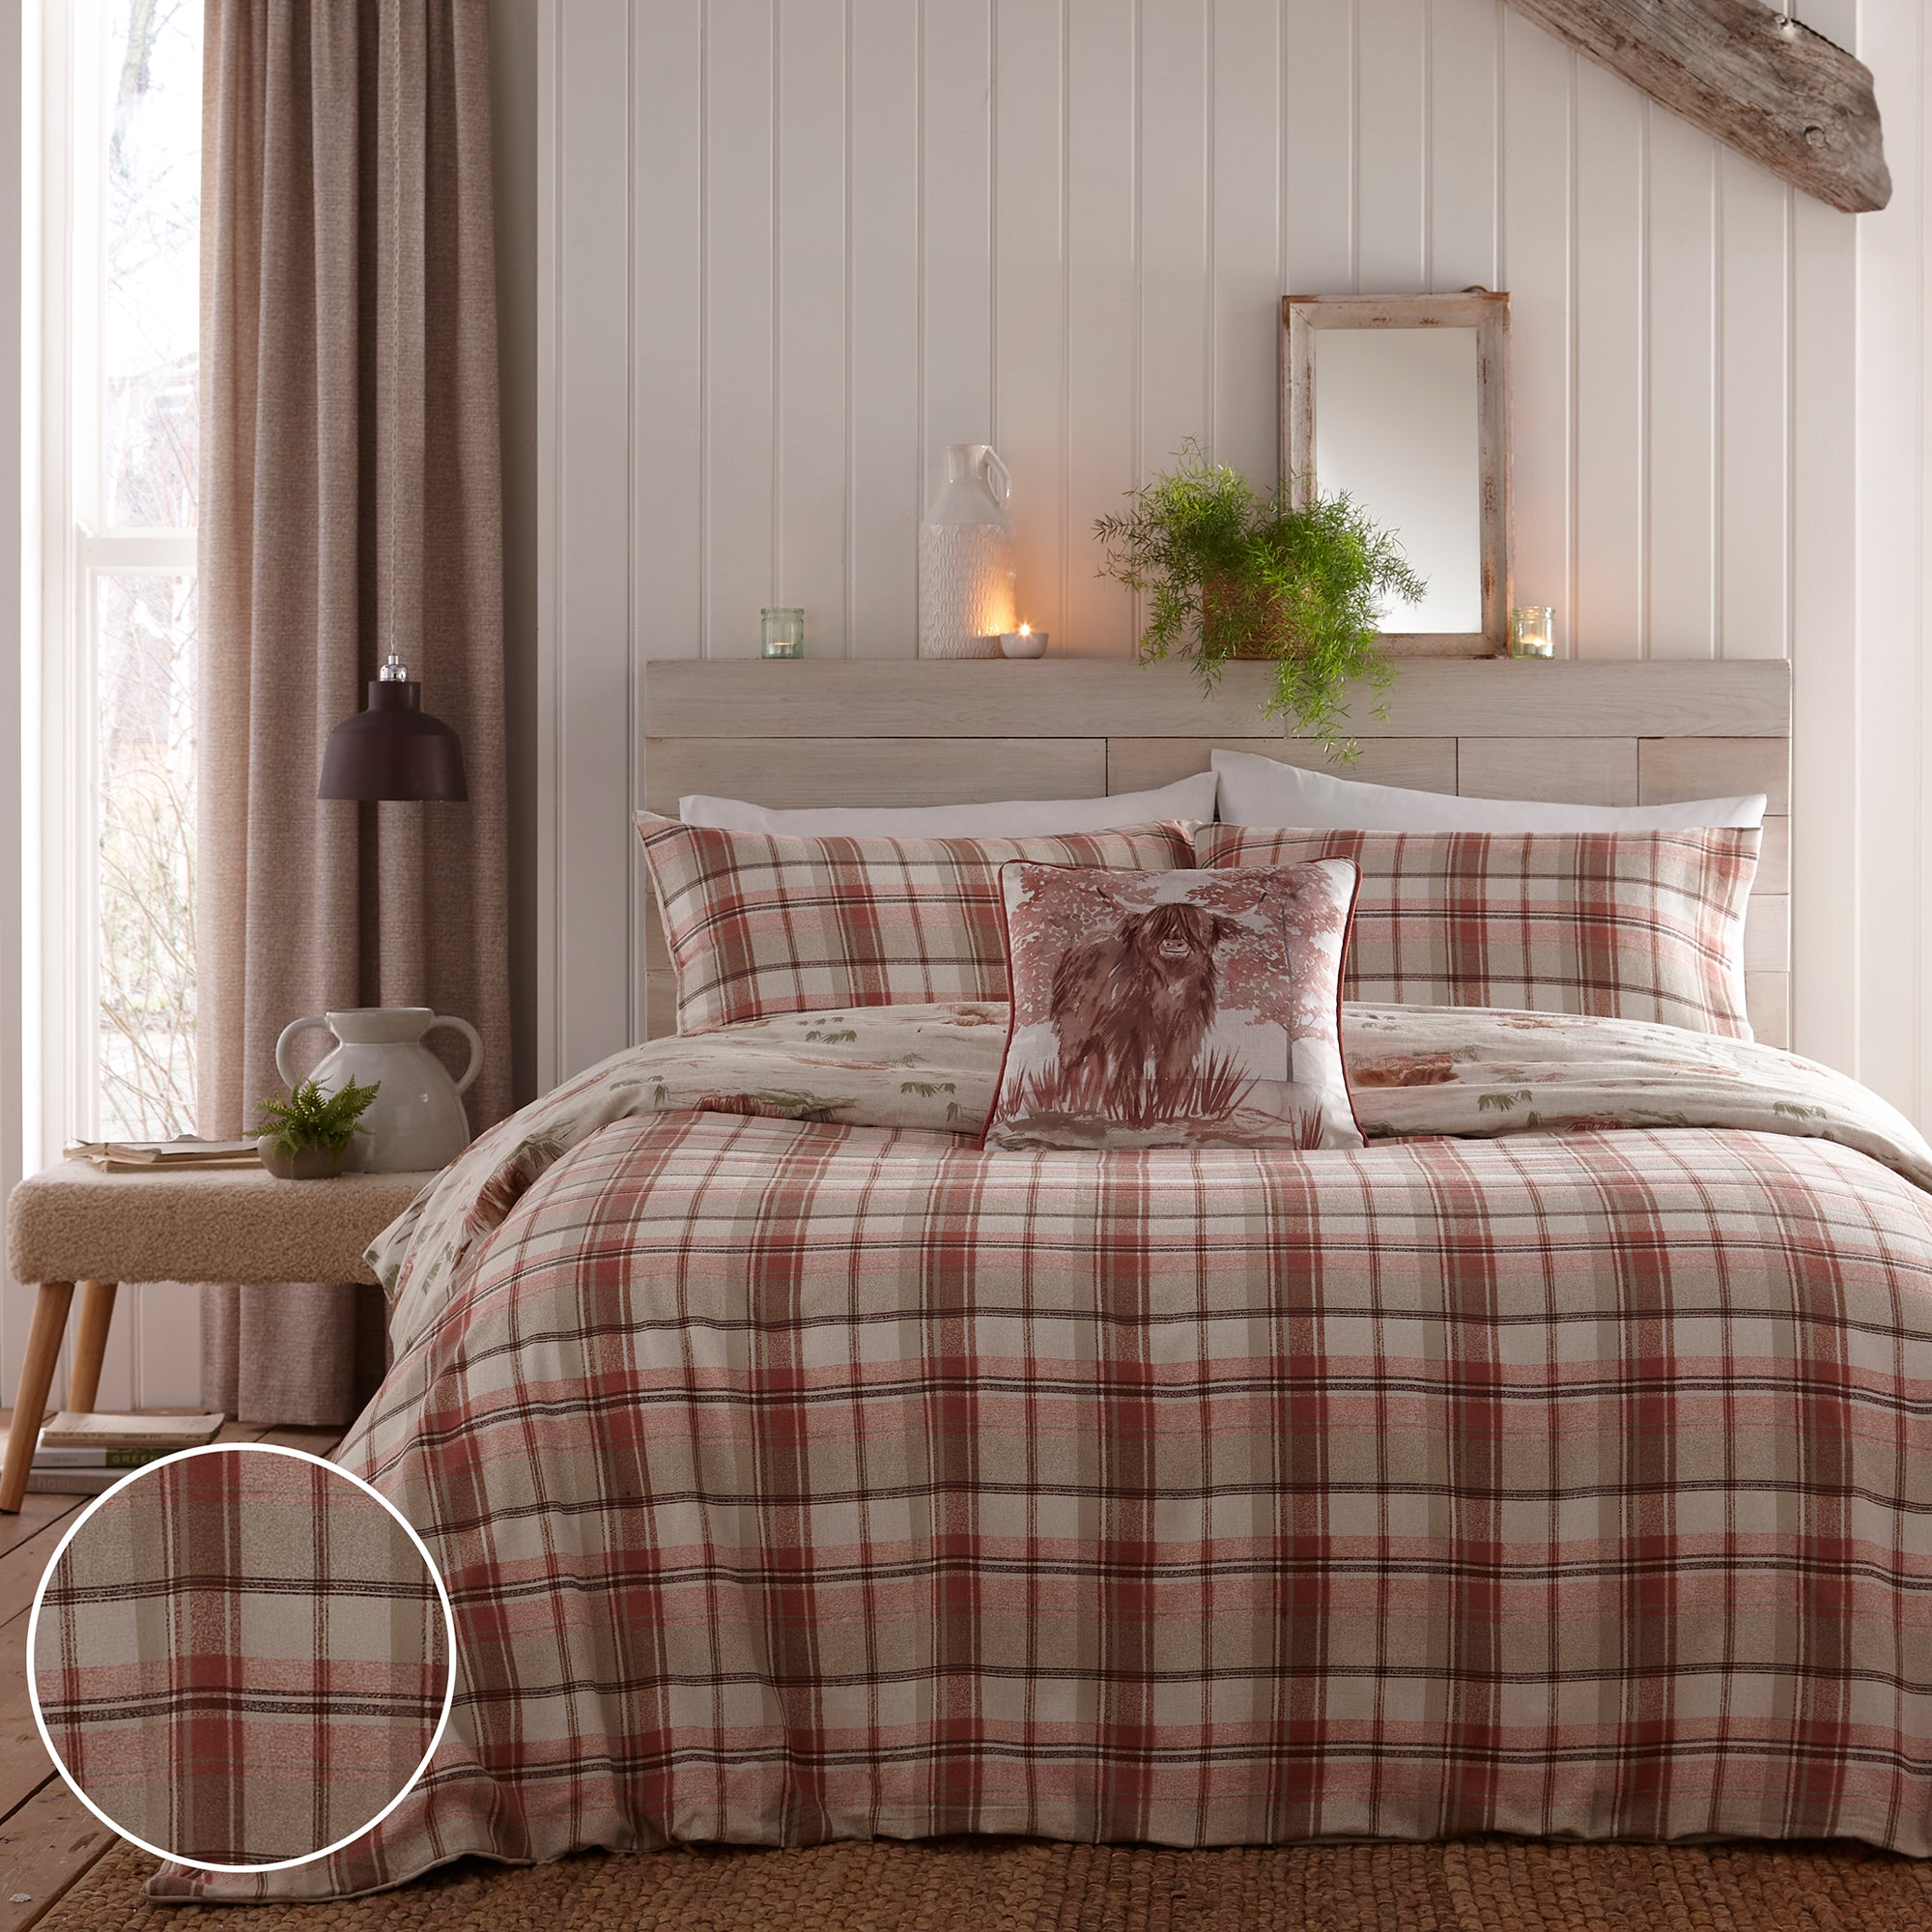 Duvet Cover Set Hanson Highland Cow by D&D Lodge in Terracotta